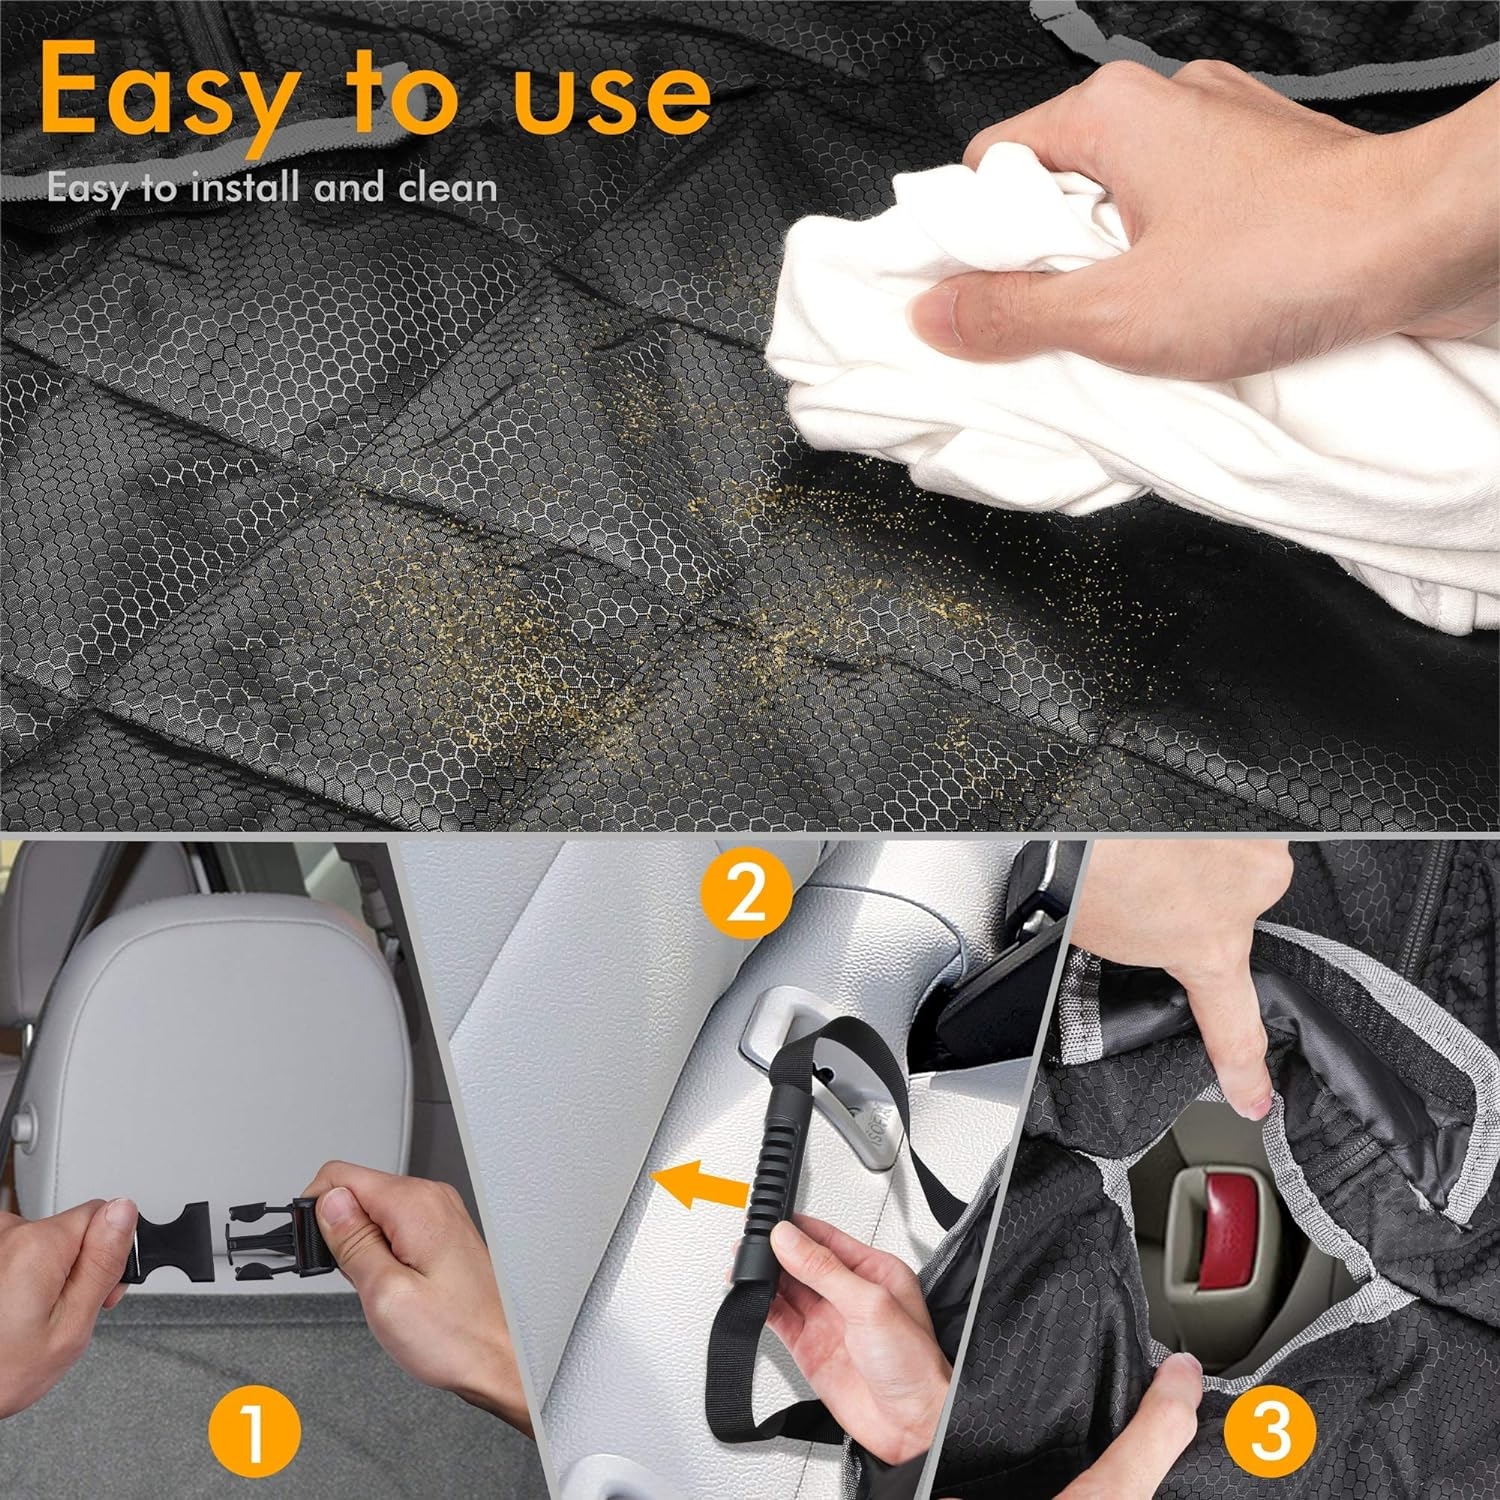 BRONZEMAN 100% Waterproof Bench Car Seat Cover Protector - Strong & Durable,Heavy-Duty and Nonslip Rear Back Seat Cover with Middle Seat Belt,Universal Size Fits for Cars, Trucks & SUVs